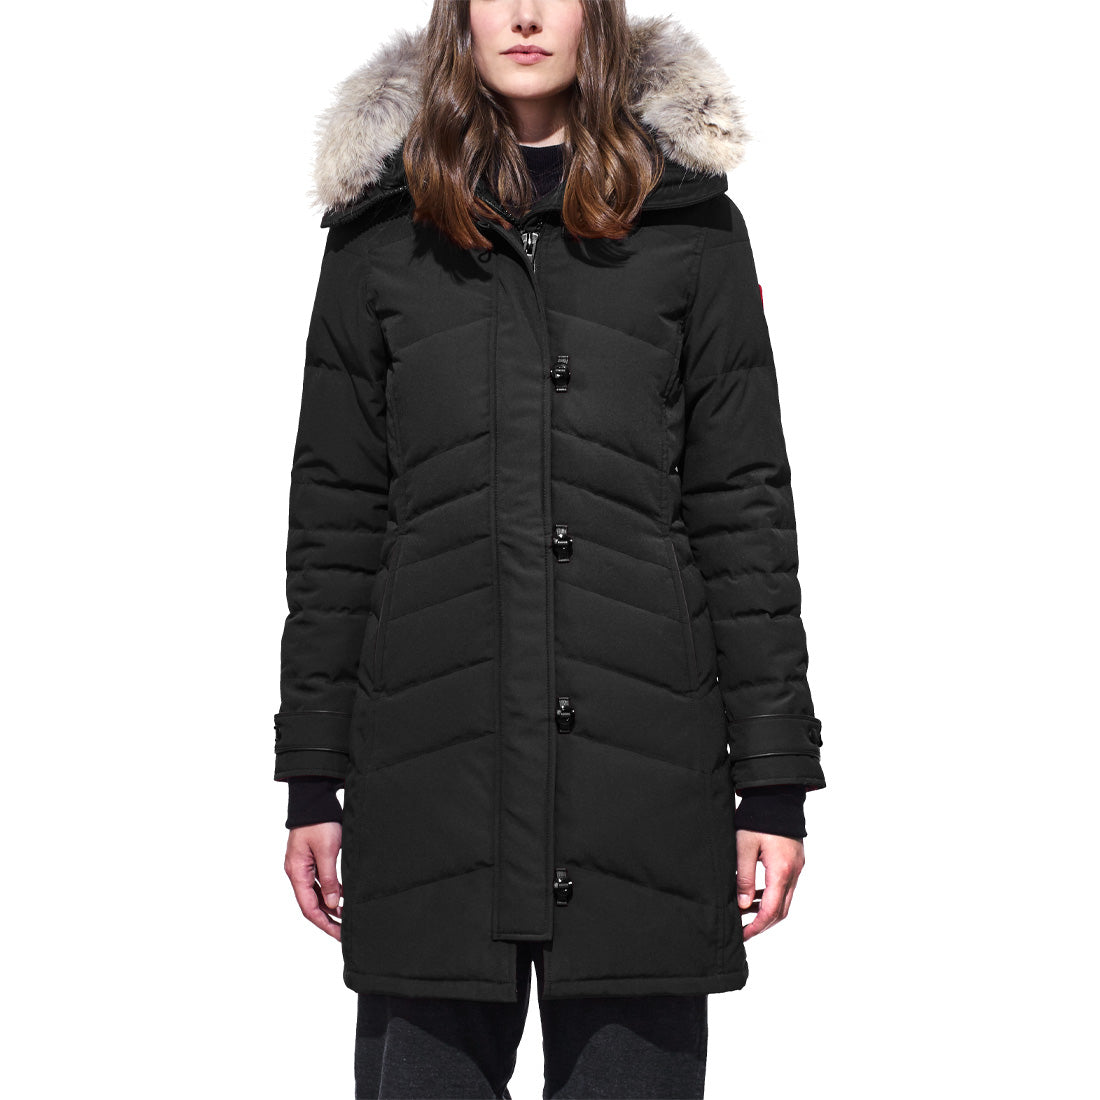 A Canada Goose Parka Is Worth It: Here's Why